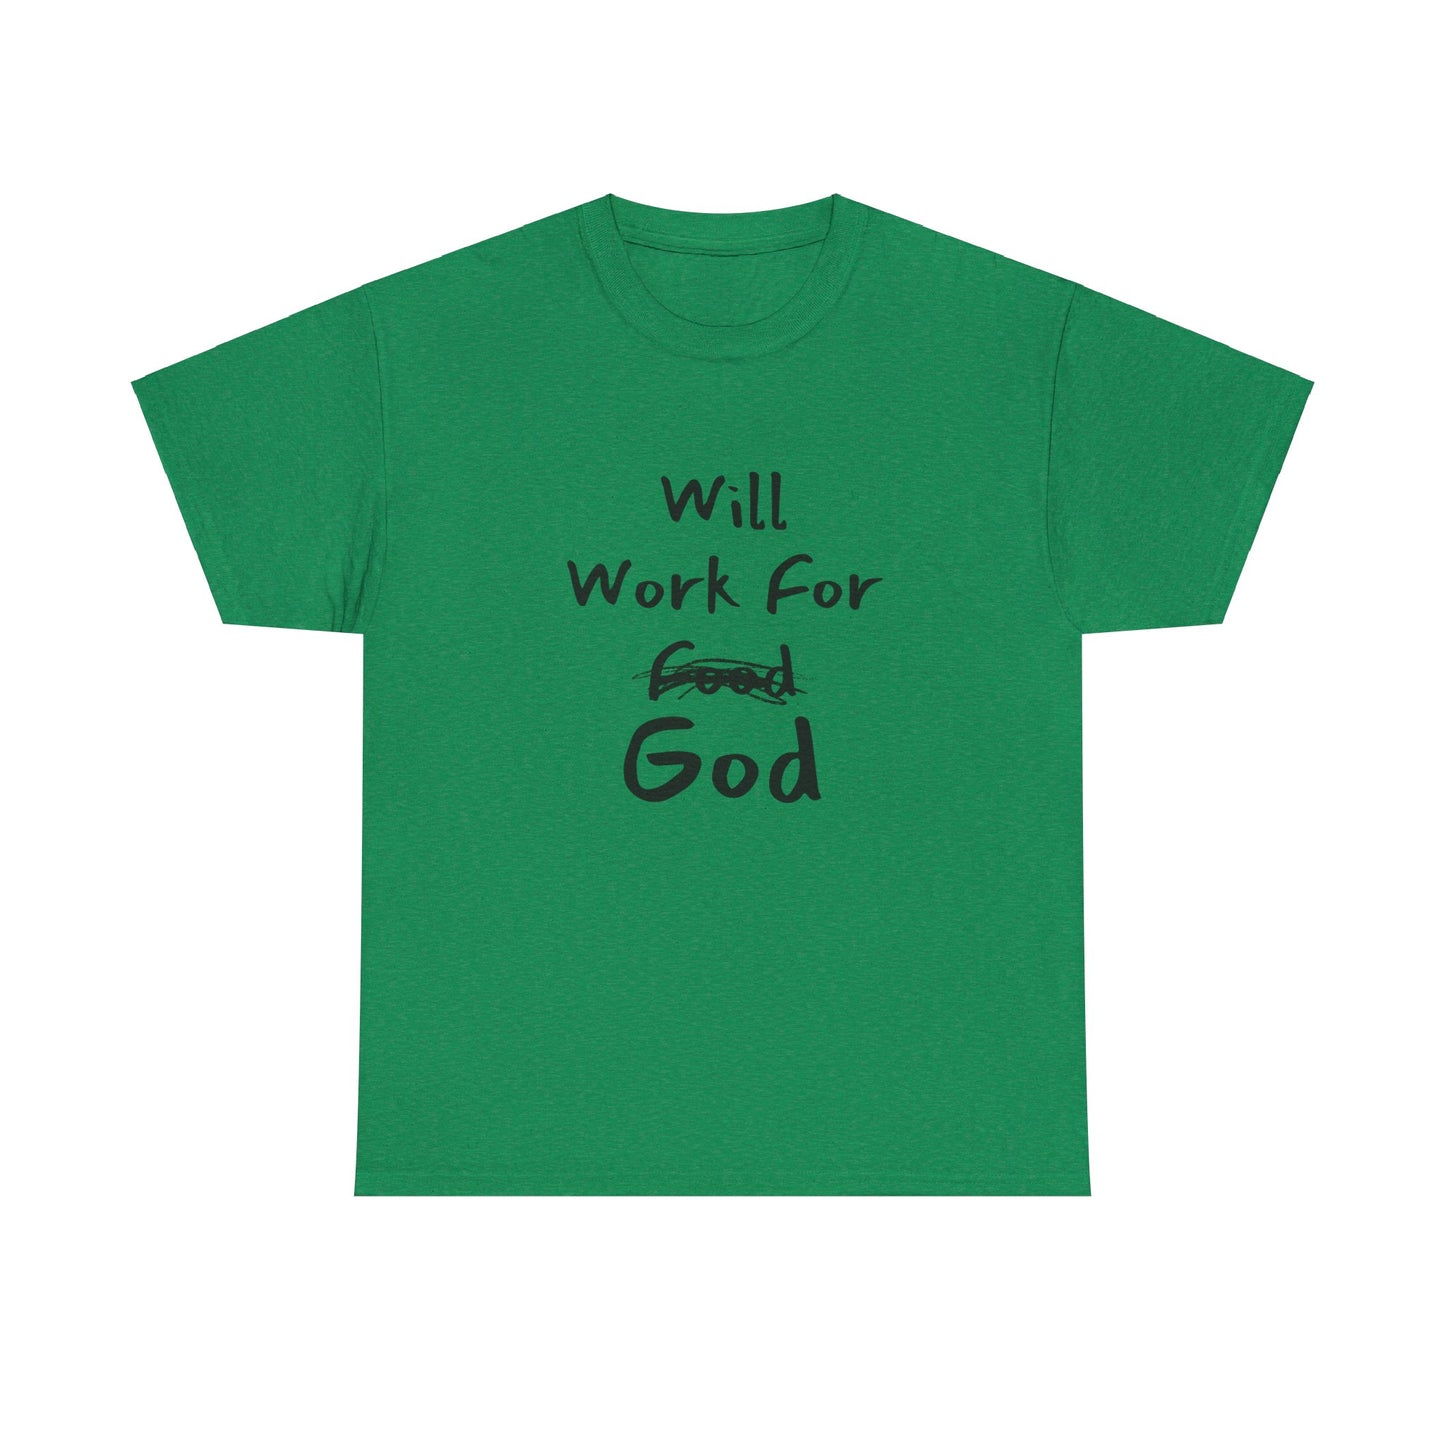 "Comfortable 100% cotton 'Will Work For God' tee for daily wear."